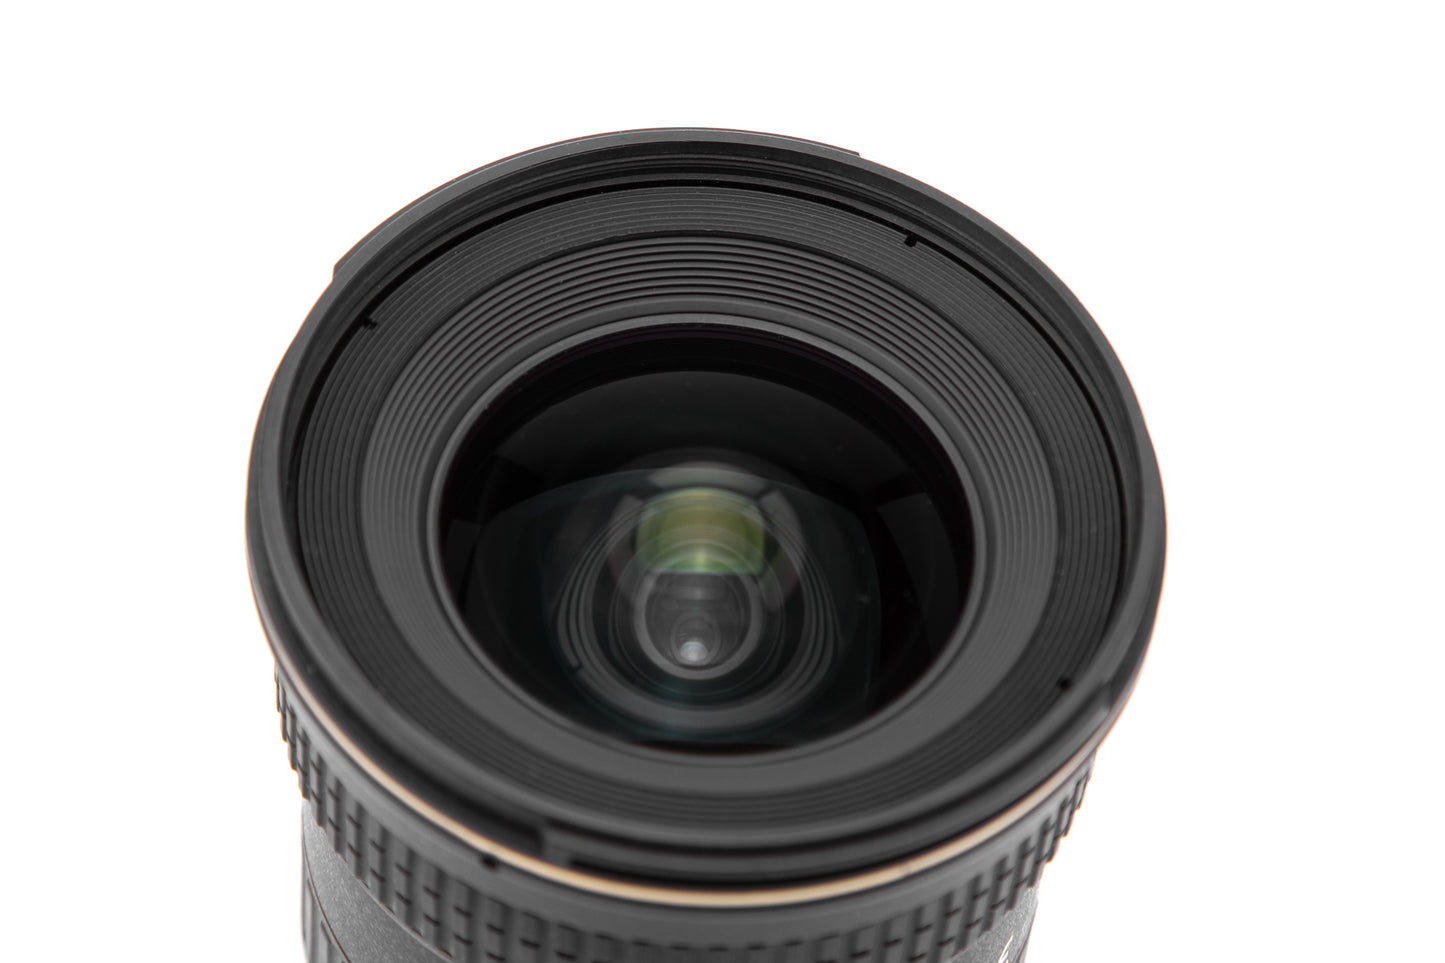 Tokina  12-24mm F4 DXII Lens - Canon EF Mount